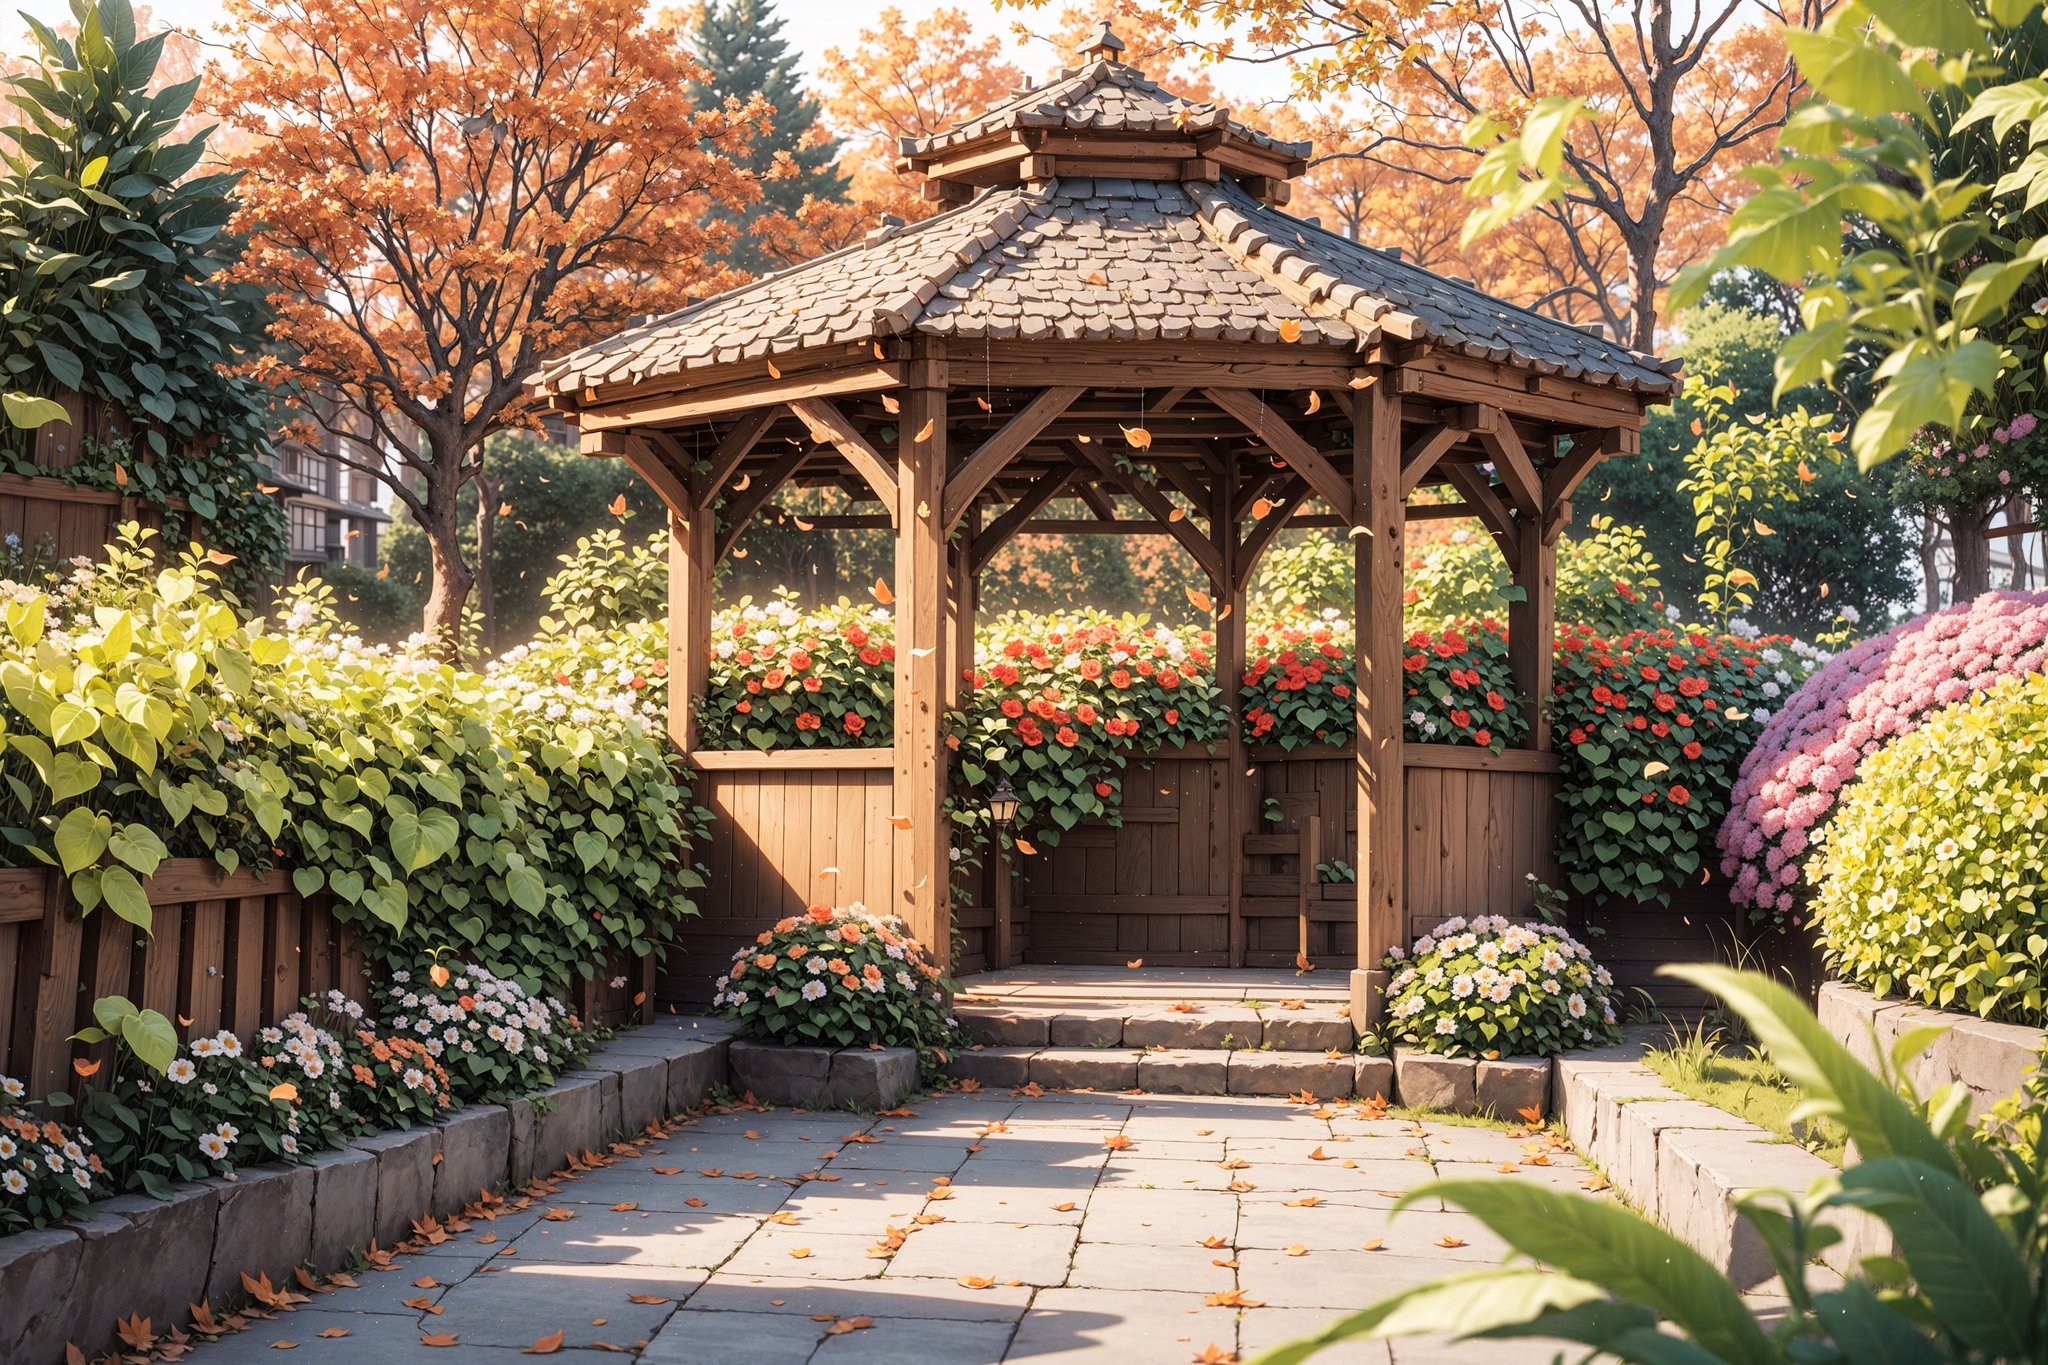 3d,Create a captivating fall garden with pathways covered in fallen leaves, vibrant flowers, and a gazebo surrounded by hanging vines and the sound of chirping birds, 